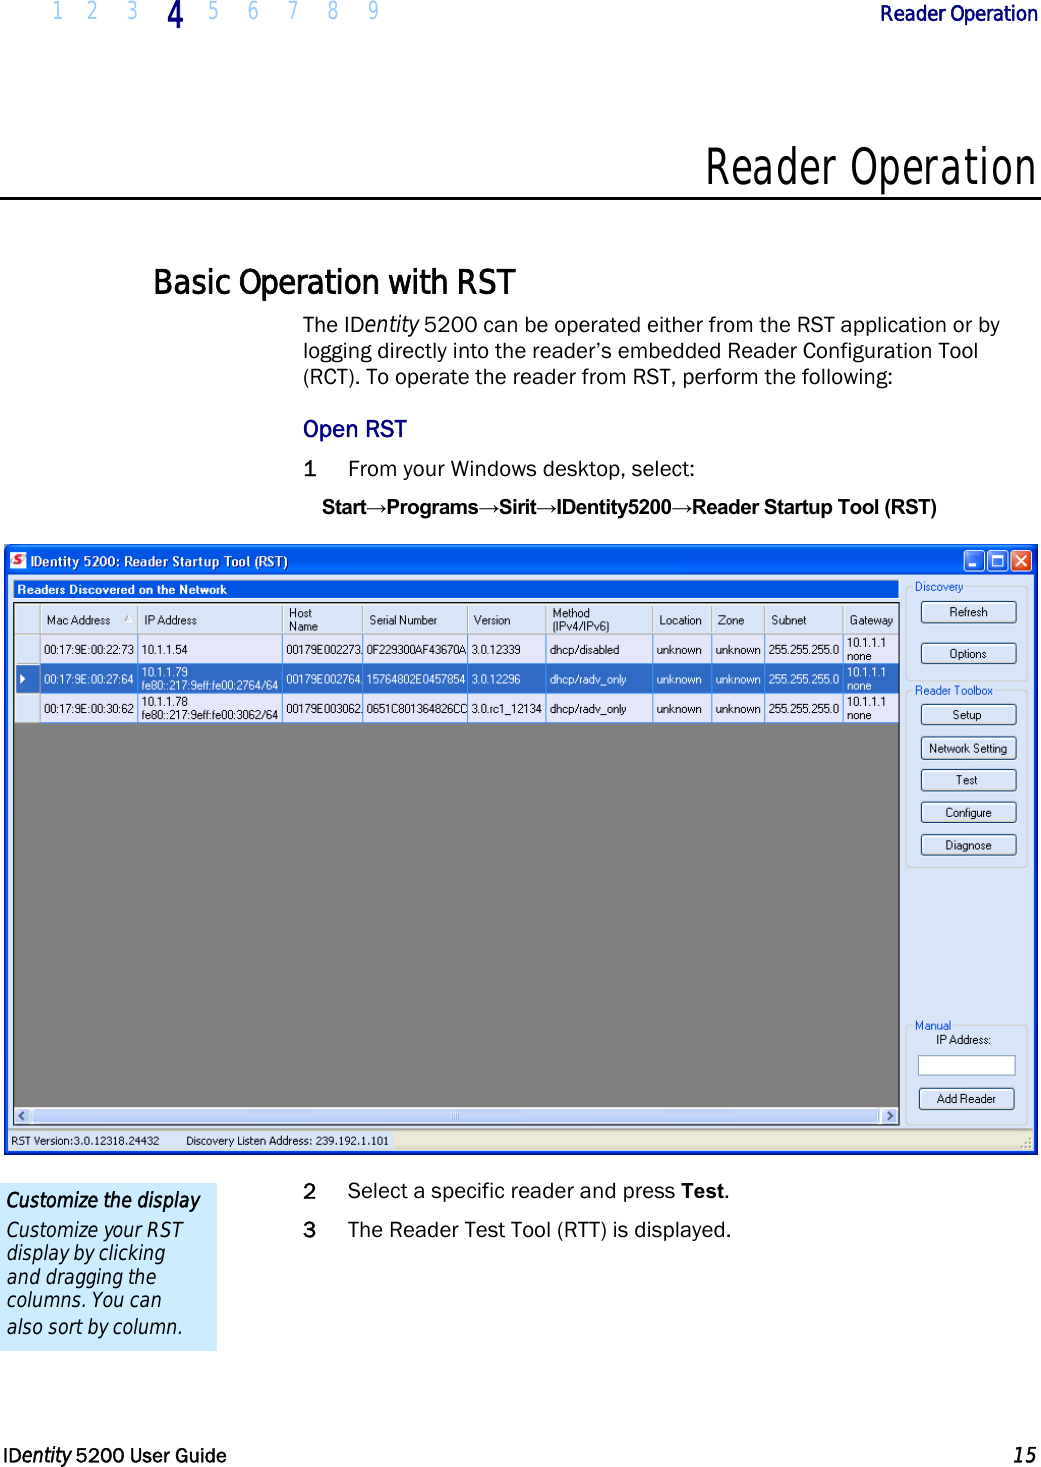  1 2 3 4 5 6 7 8 9            Reader Operation   IDentity 5200 User Guide  15  Reader Operation  Basic Operation with RST The IDentity 5200 can be operated either from the RST application or by logging directly into the reader’s embedded Reader Configuration Tool (RCT). To operate the reader from RST, perform the following: Open RST 1 From your Windows desktop, select: Start→Programs→Sirit→IDentity5200→Reader Startup Tool (RST)  2 Select a specific reader and press Test.  3 The Reader Test Tool (RTT) is displayed. Customize the display Customize your RST display by clicking and dragging the columns. You can also sort by column. 